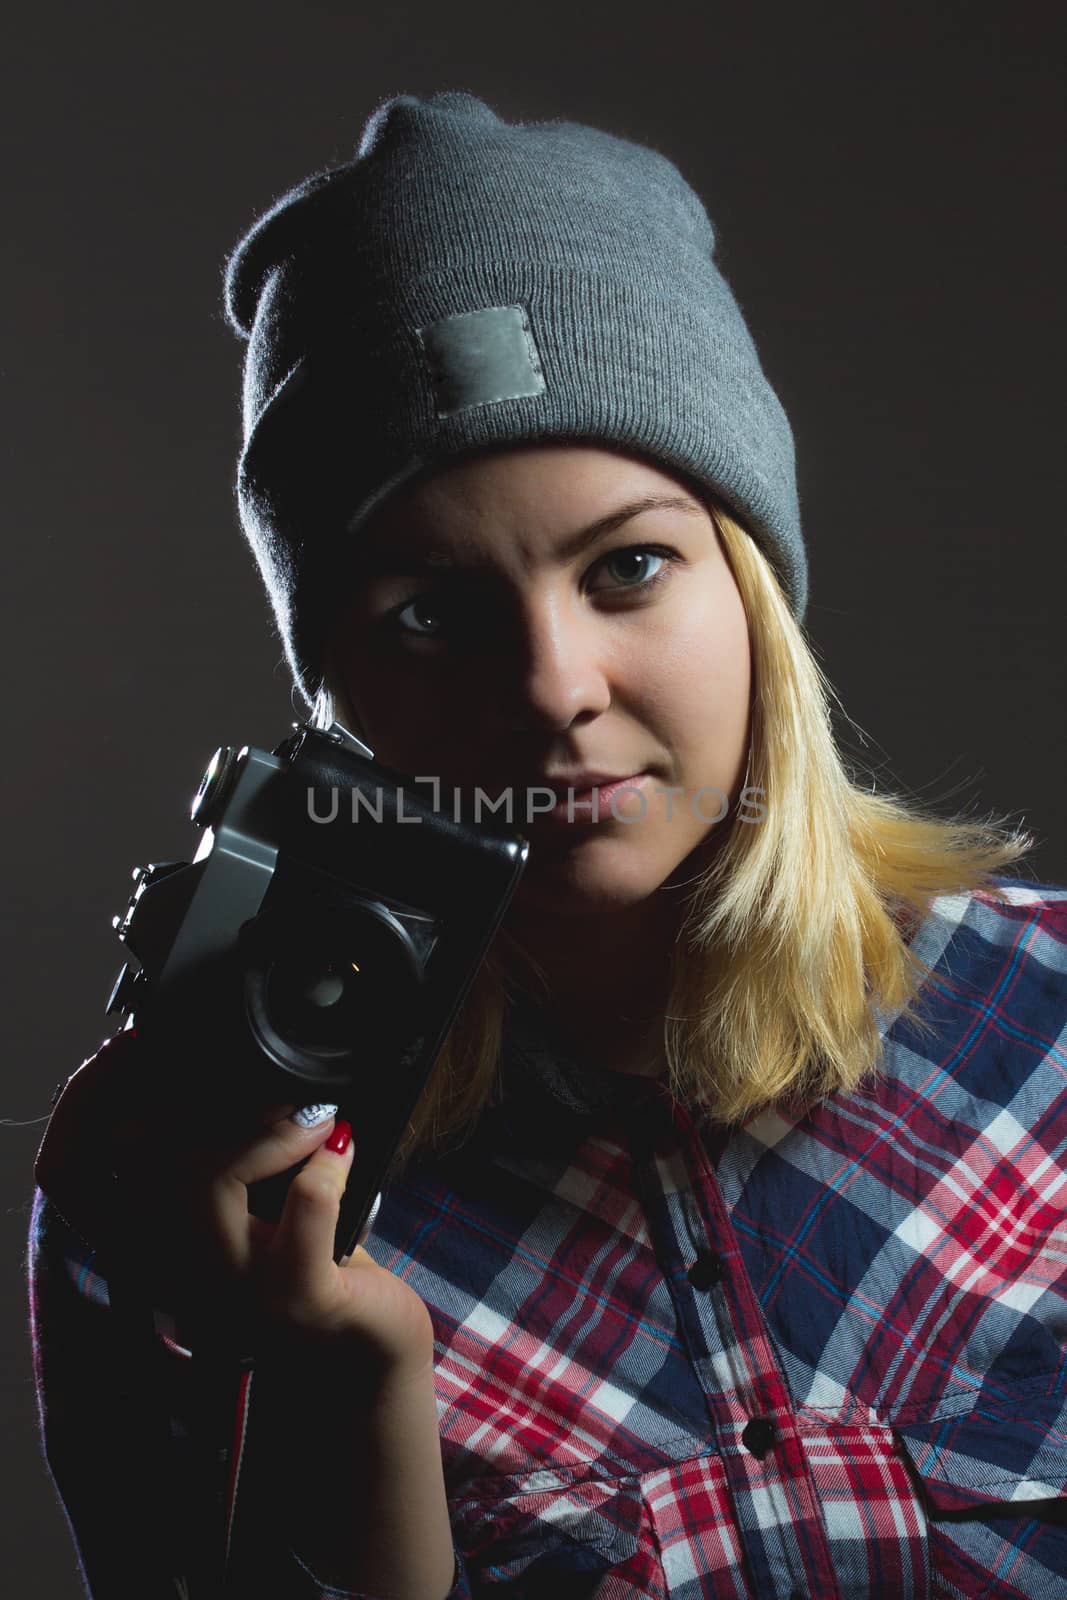 Portrait of hipster girl posing with retro camera wearing checkered shirt and winter hat on dark background